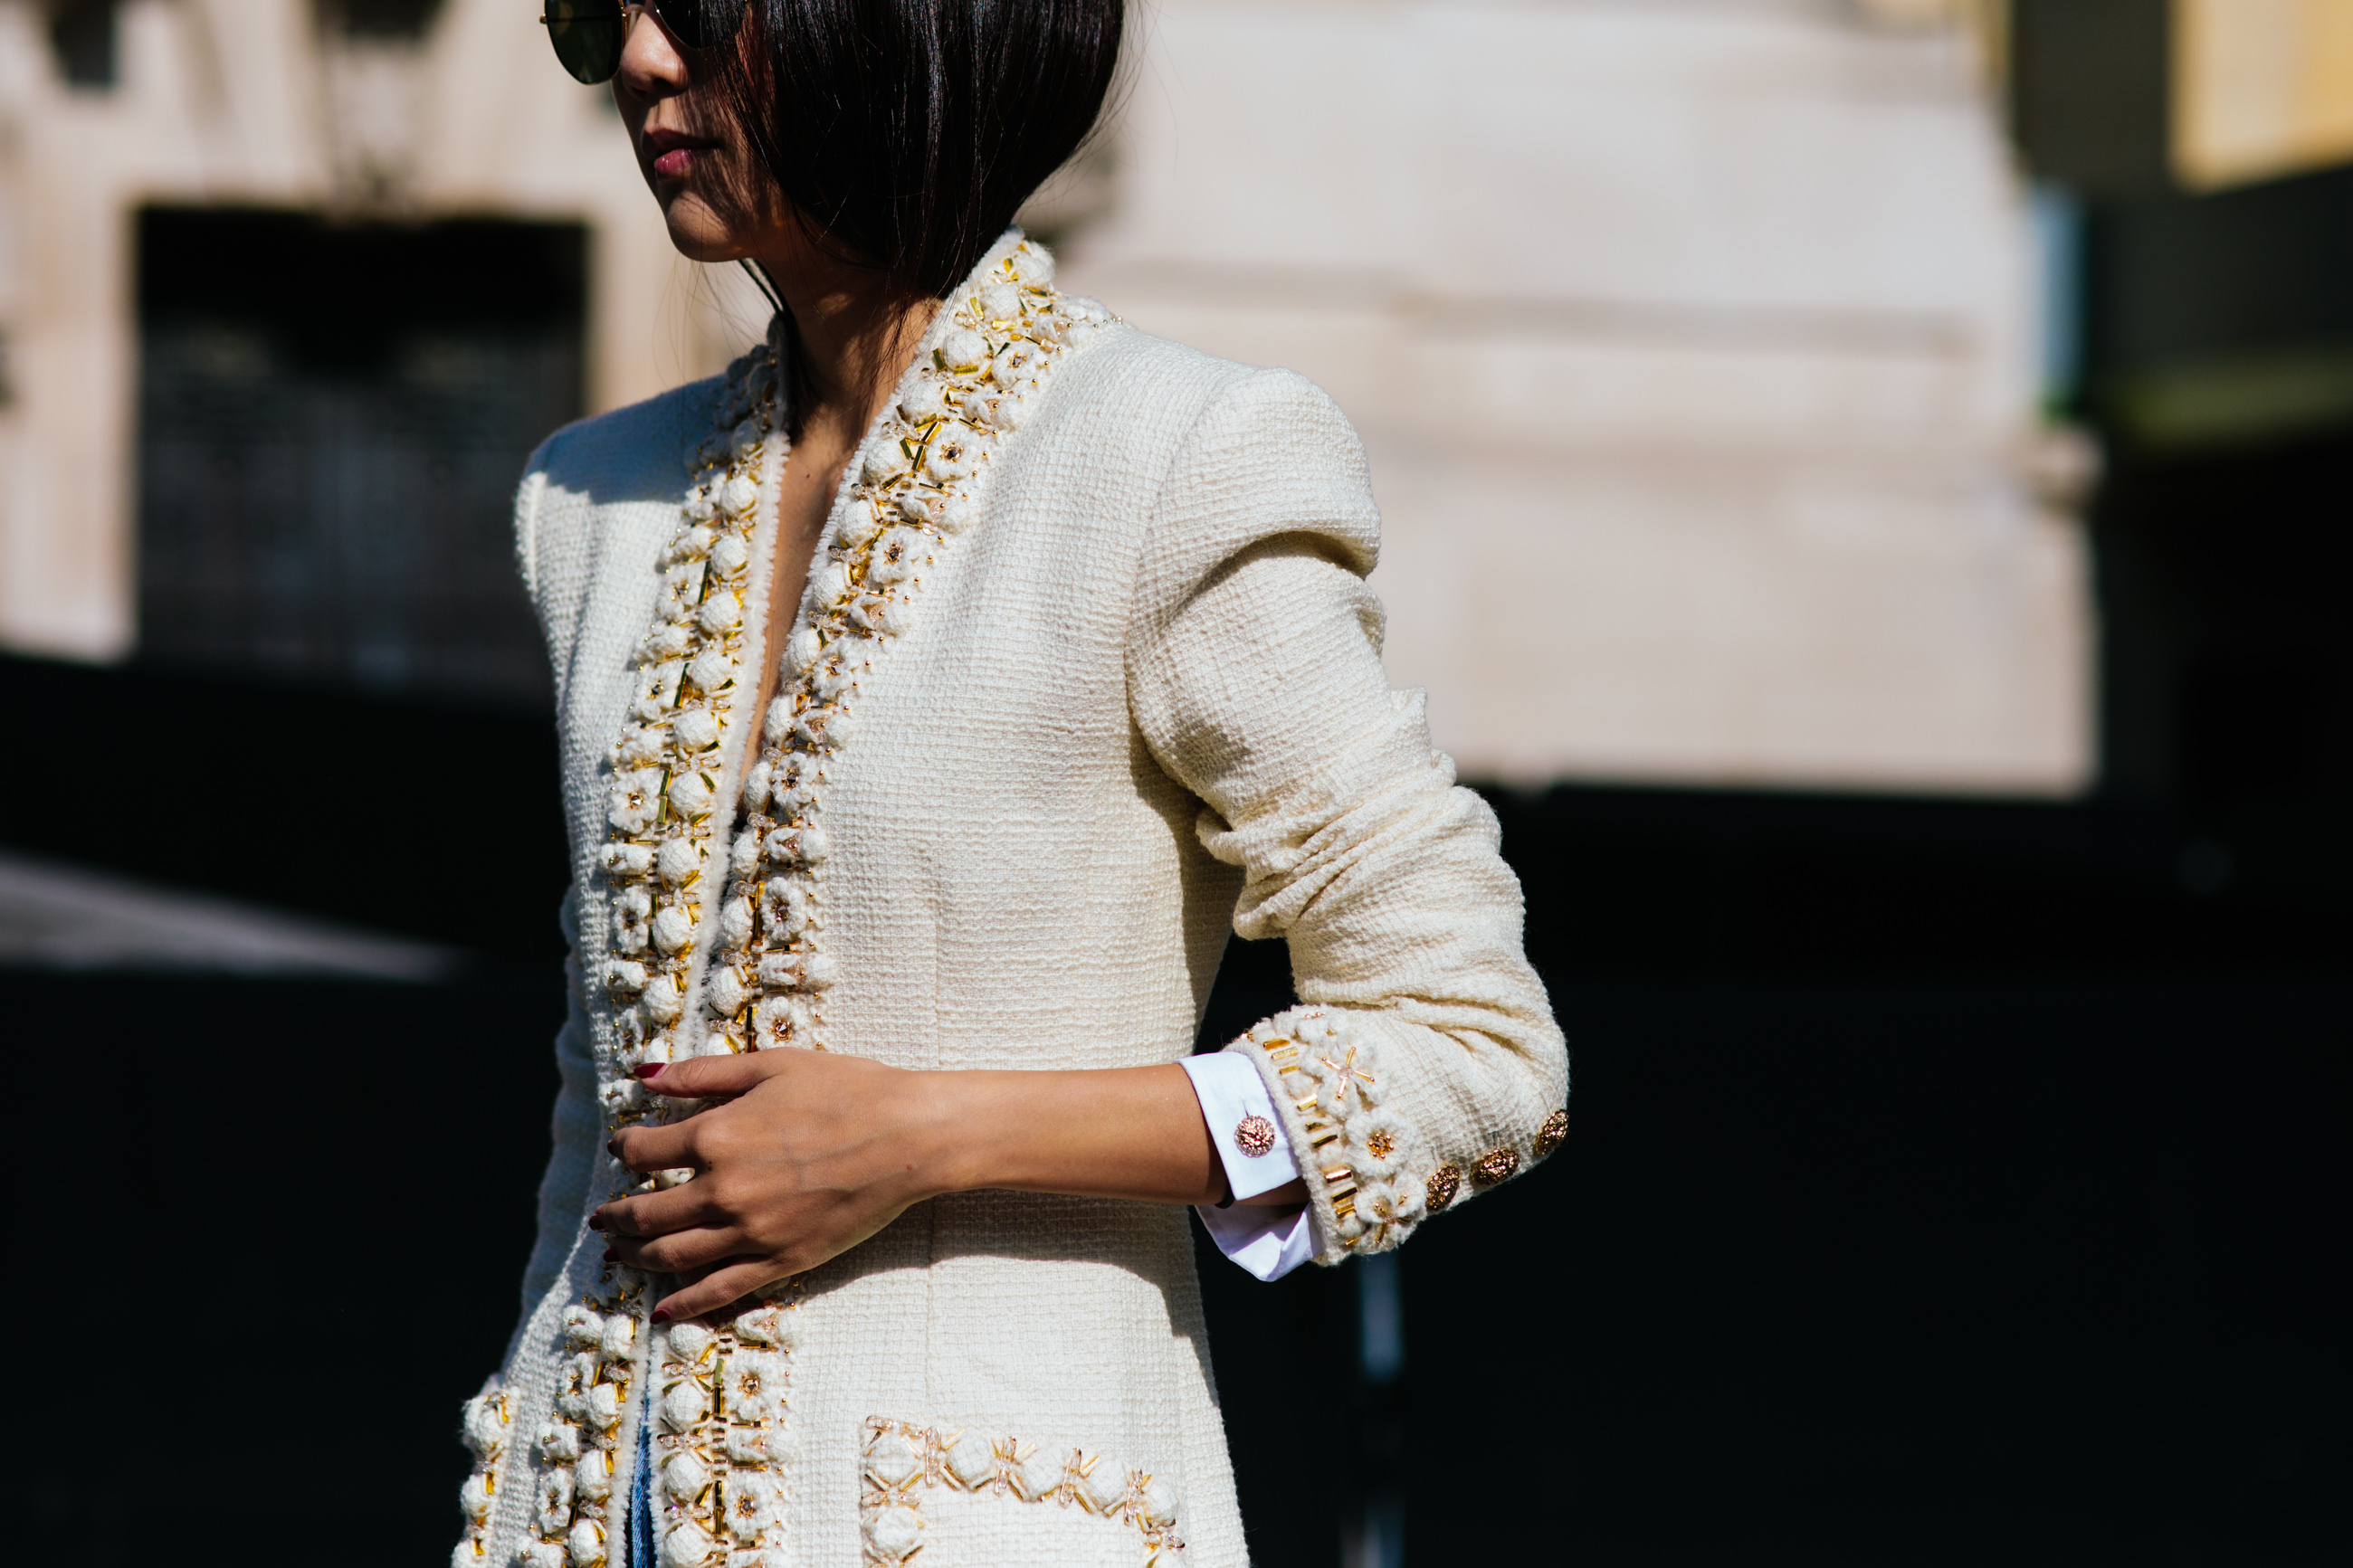 Designer Yoyo Cao wearing a Chanel jacket before the Chanel Couture FW 17-18 Fashion Show in Paris, France